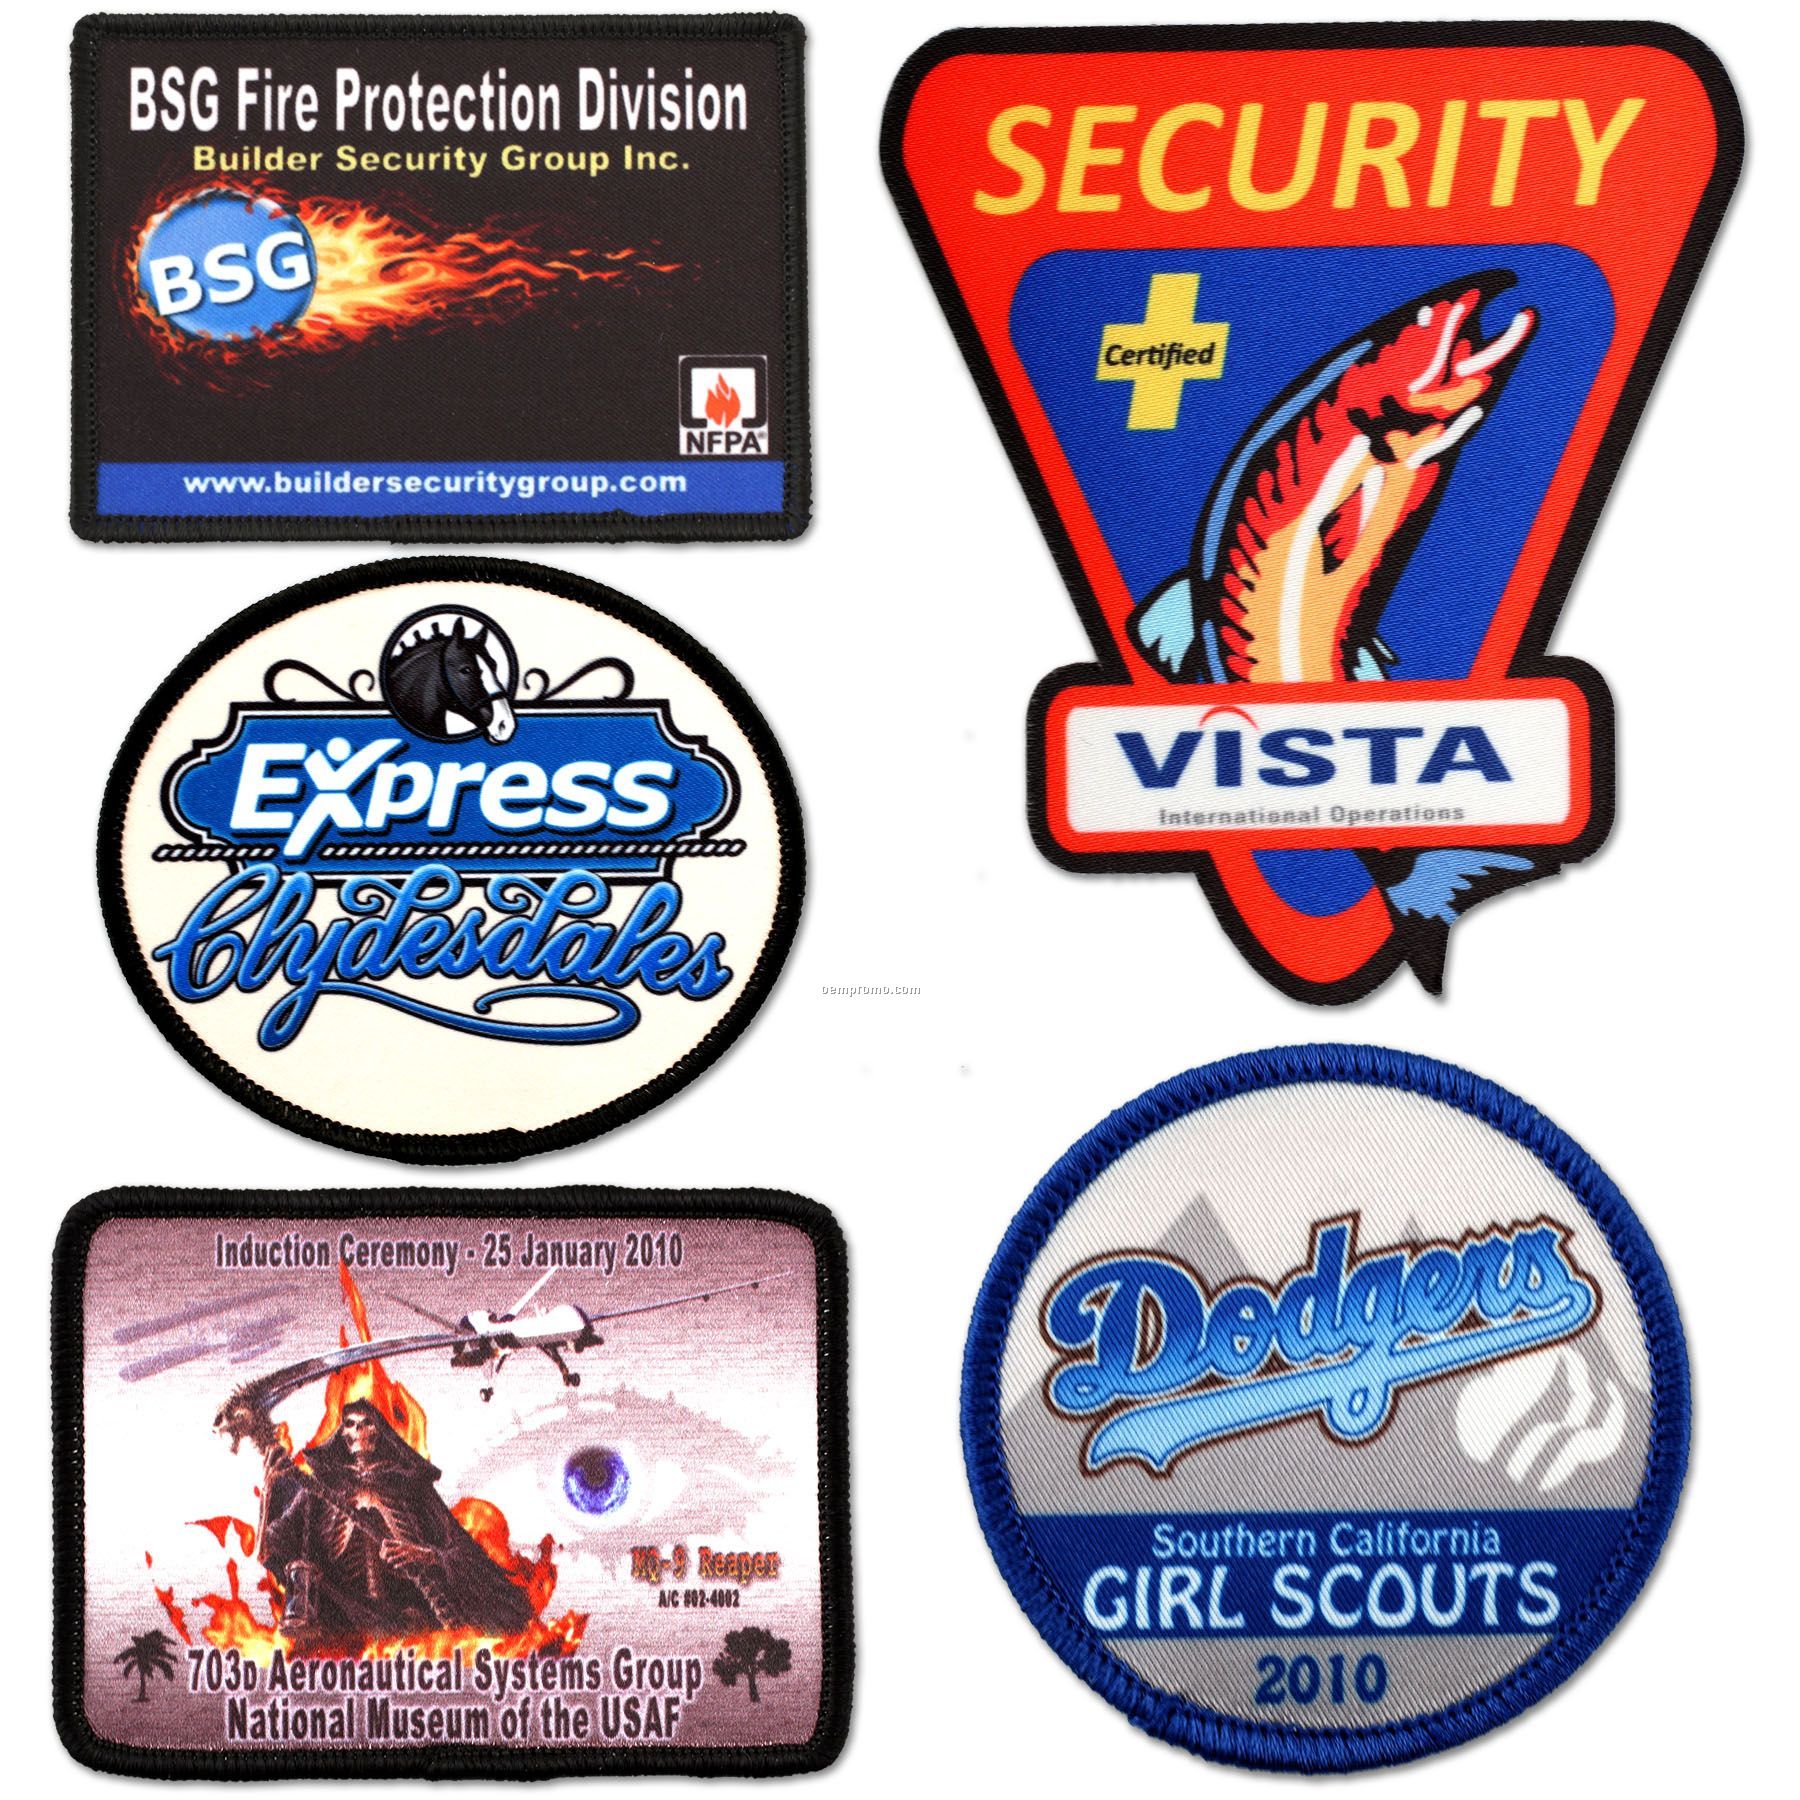 4-color Process / Sublimated Patch - 4 Sq. In.